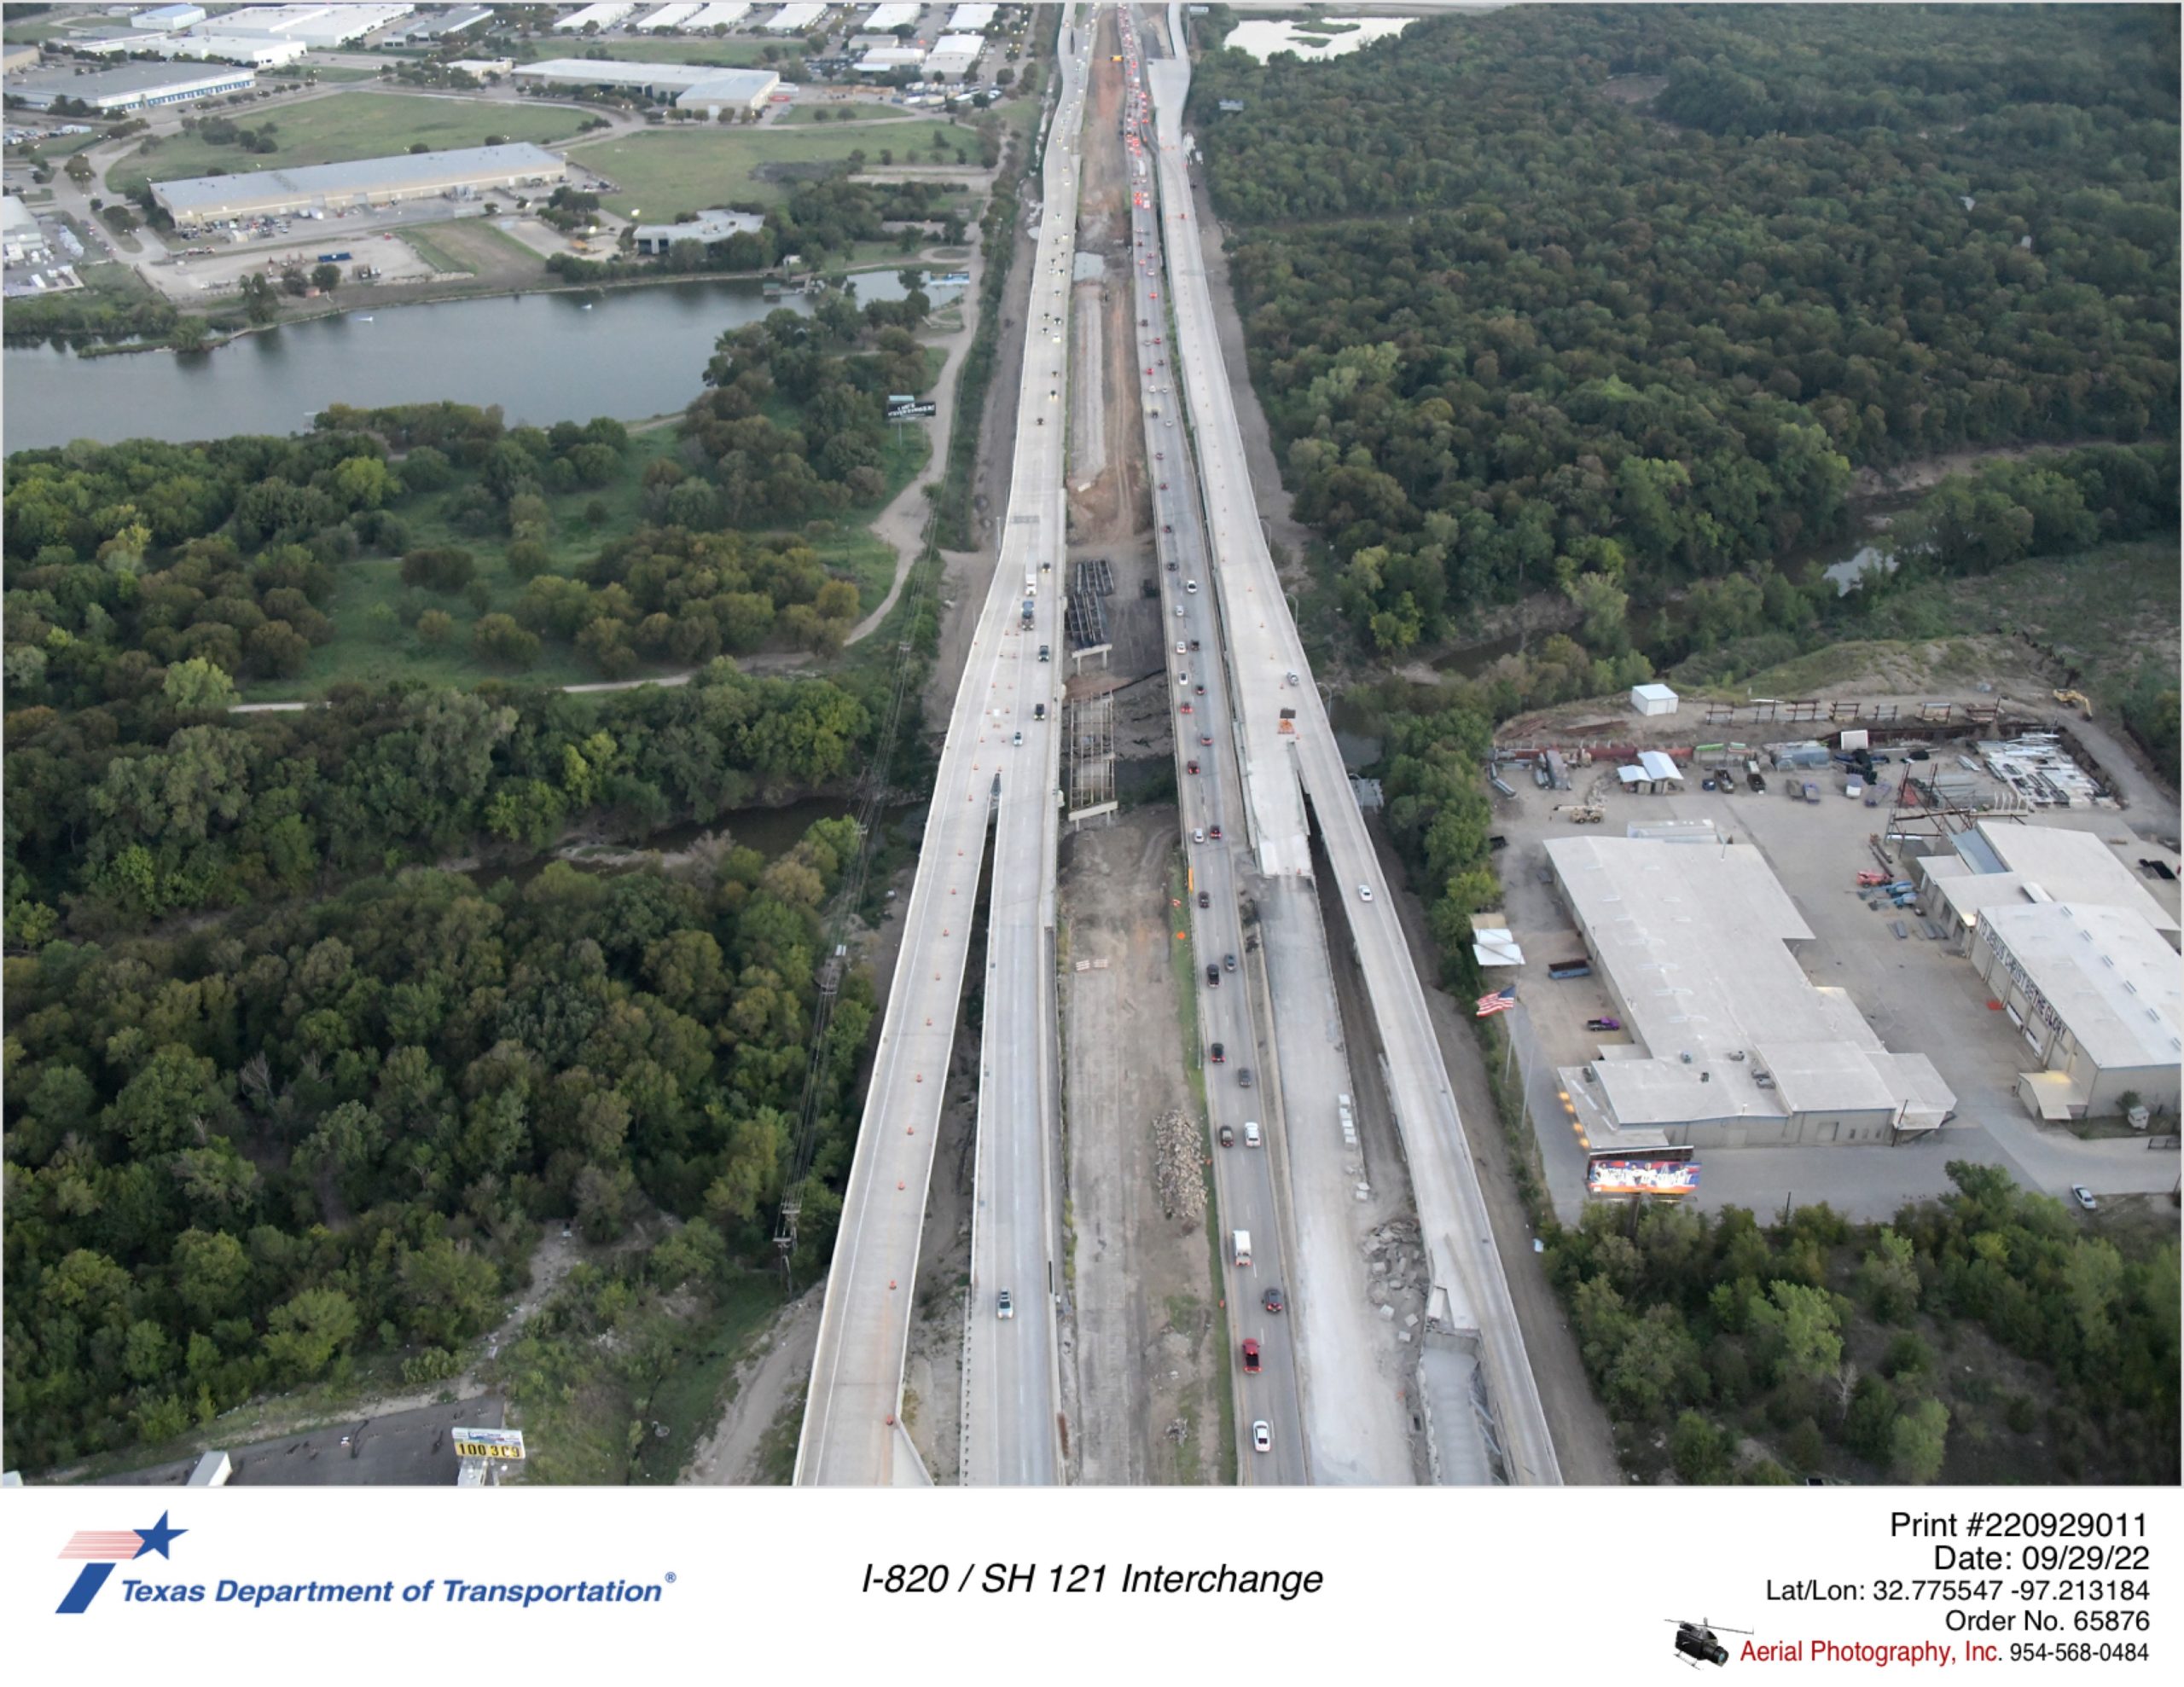 I-820 looking north over Randol Mill Rd. Removal of old I-820 bridges over Trinity River and floodplain shown between I-820 traffic.